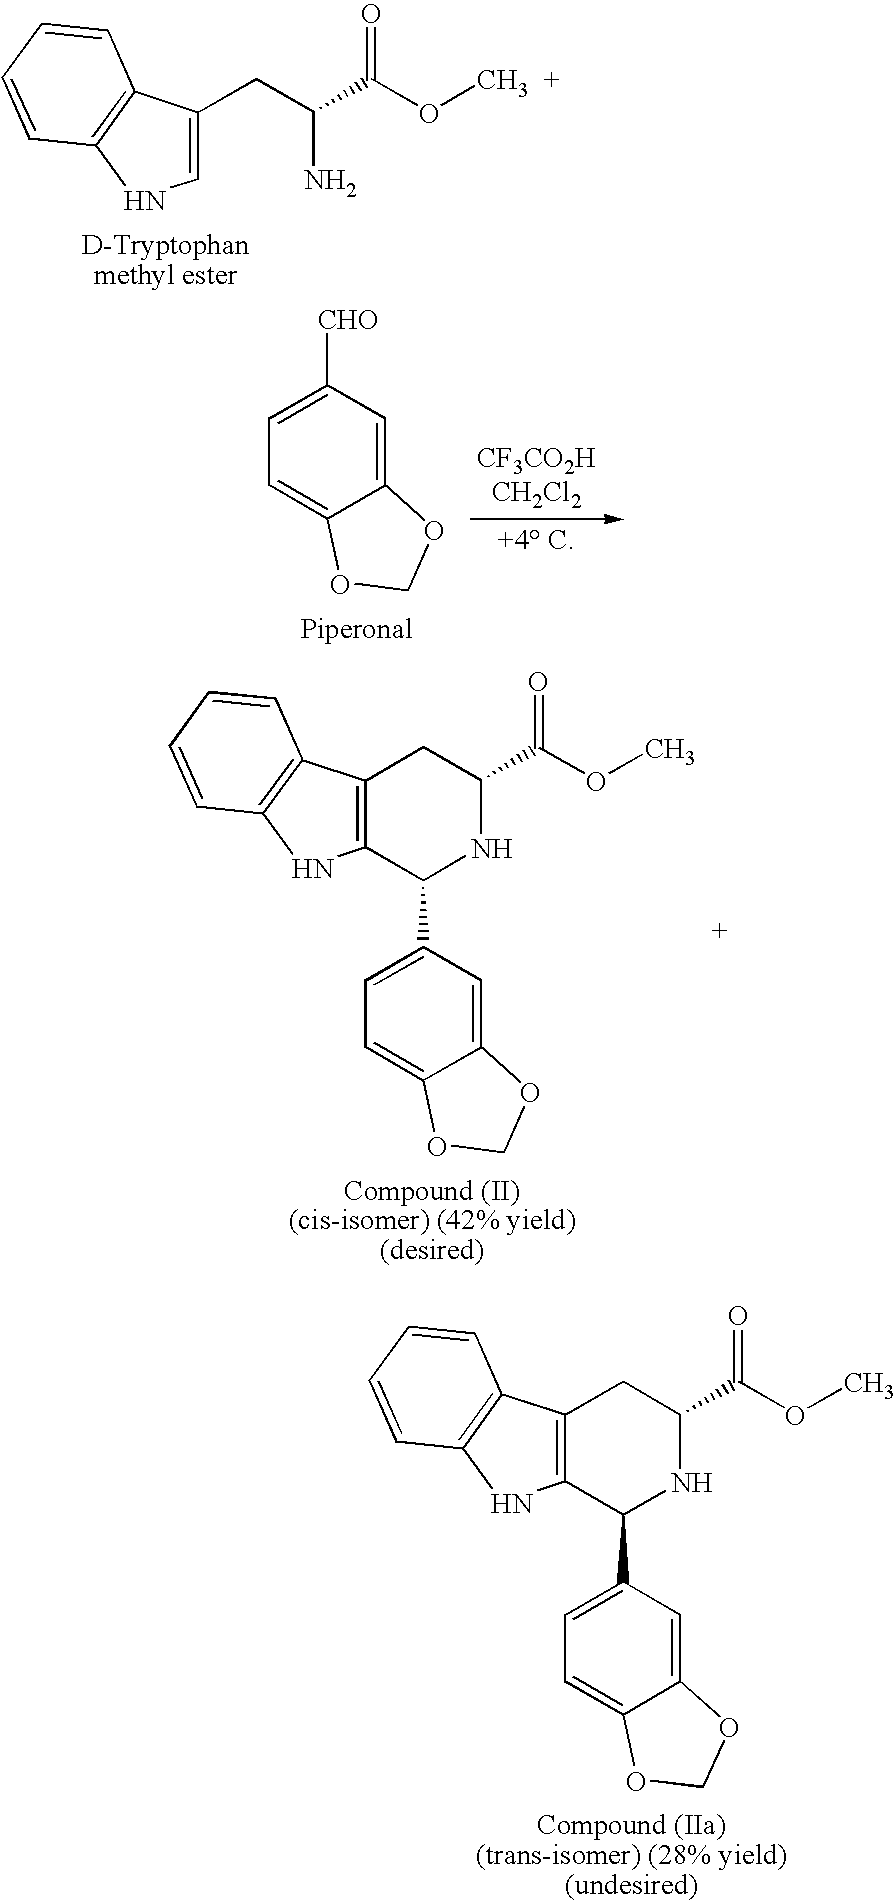 Modified pictet-spengler reaction and products prepared therefrom